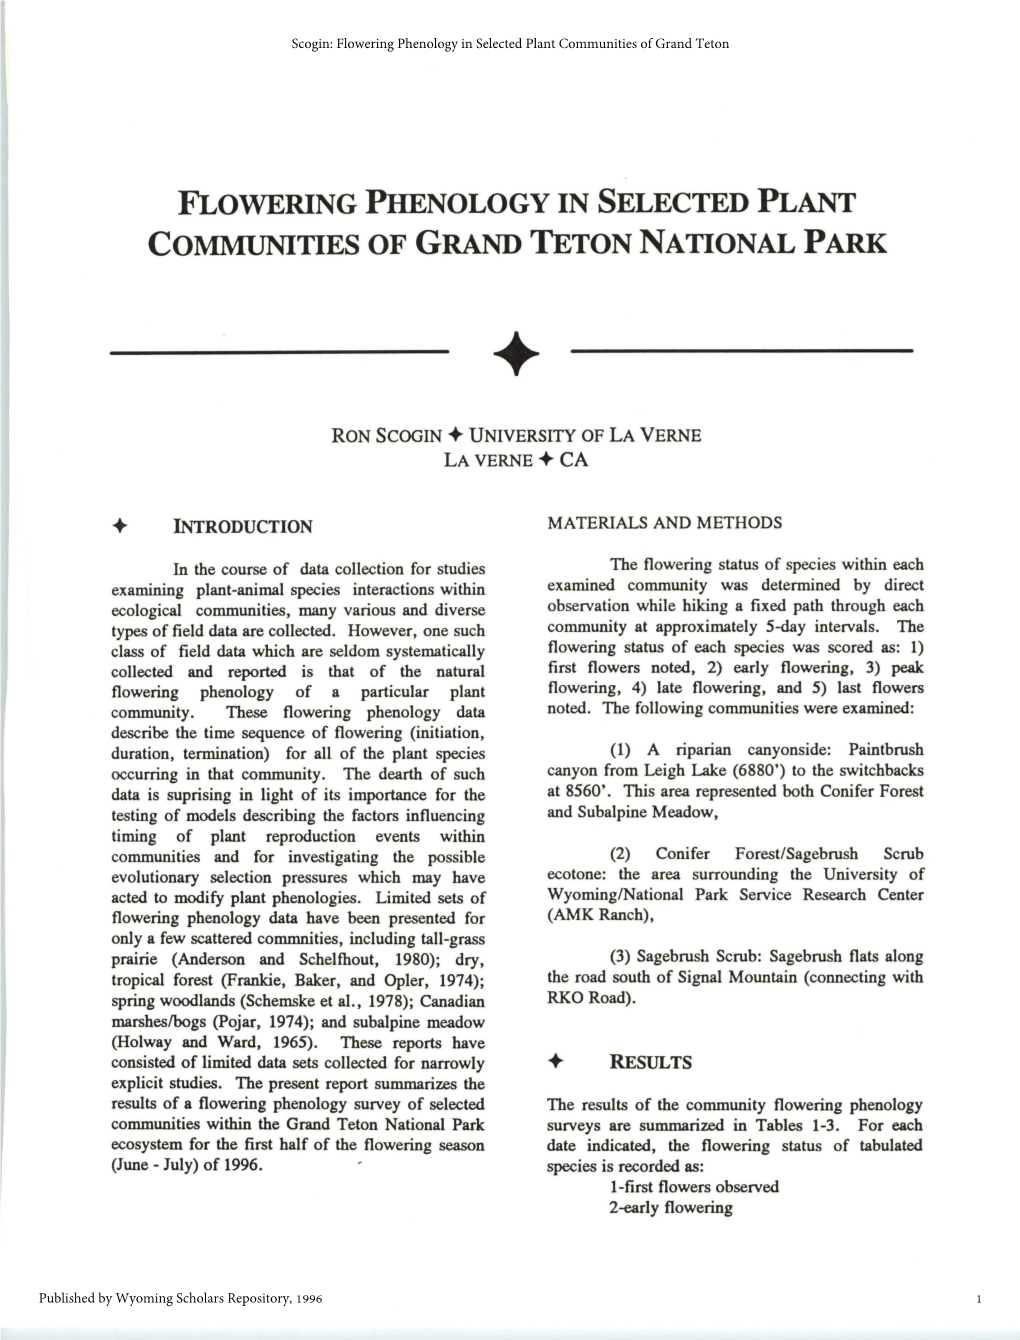 Flowering Phenology in Selected Plant Communities of Grand Teton